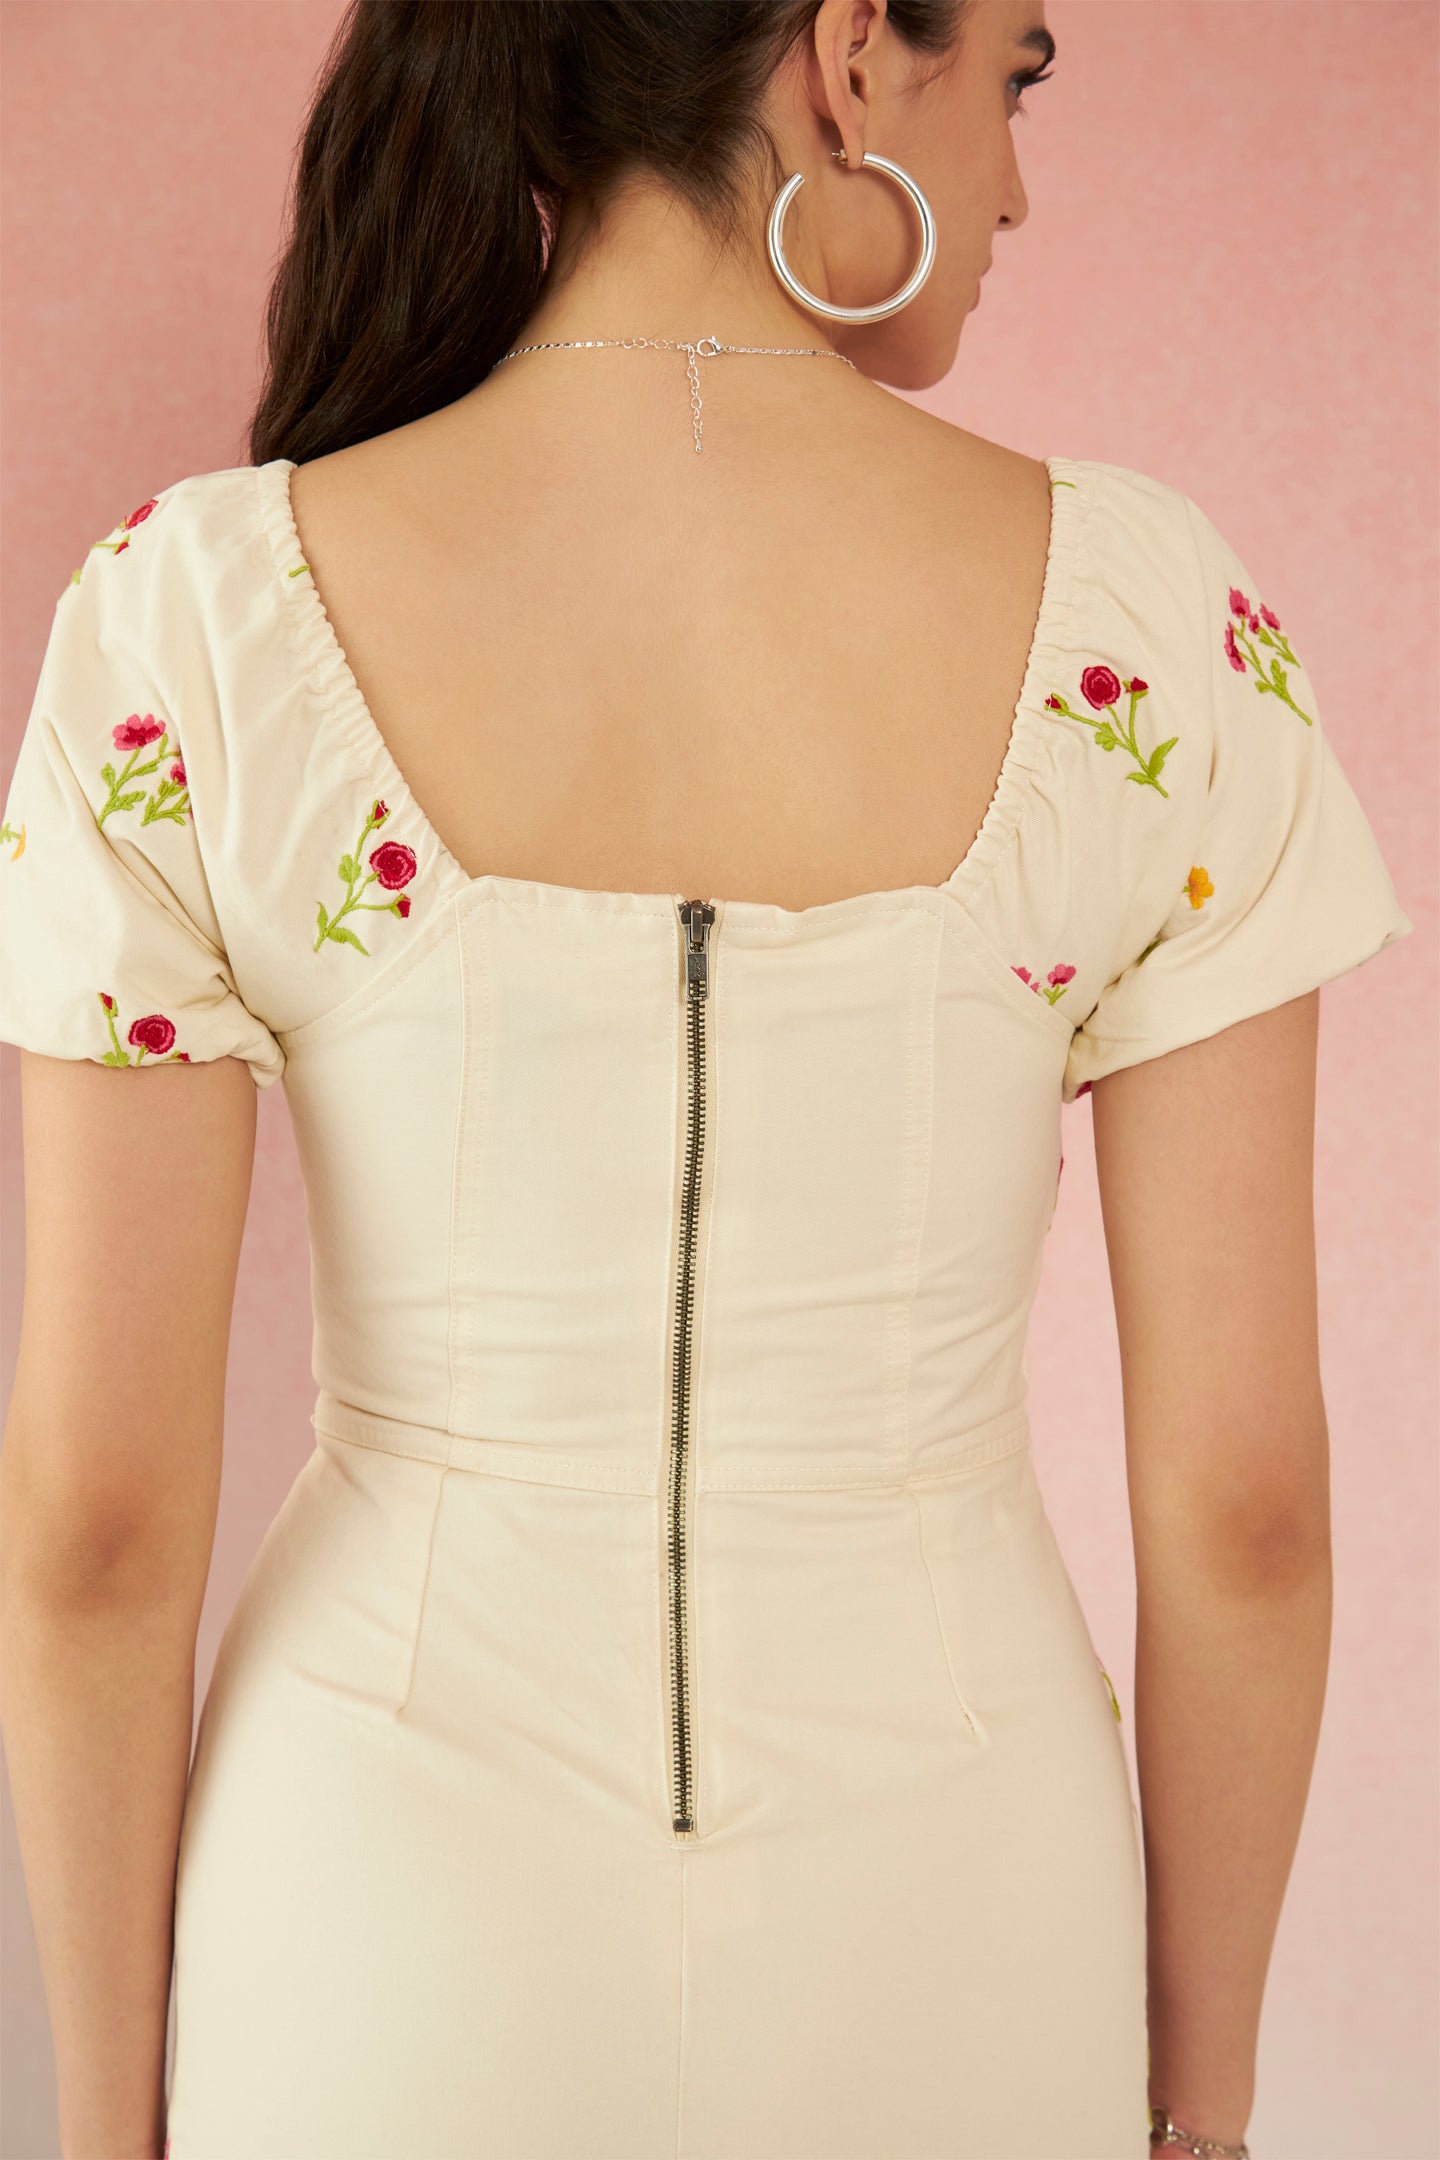 Alice|Comfy Cotton Floral Embroidered Dress